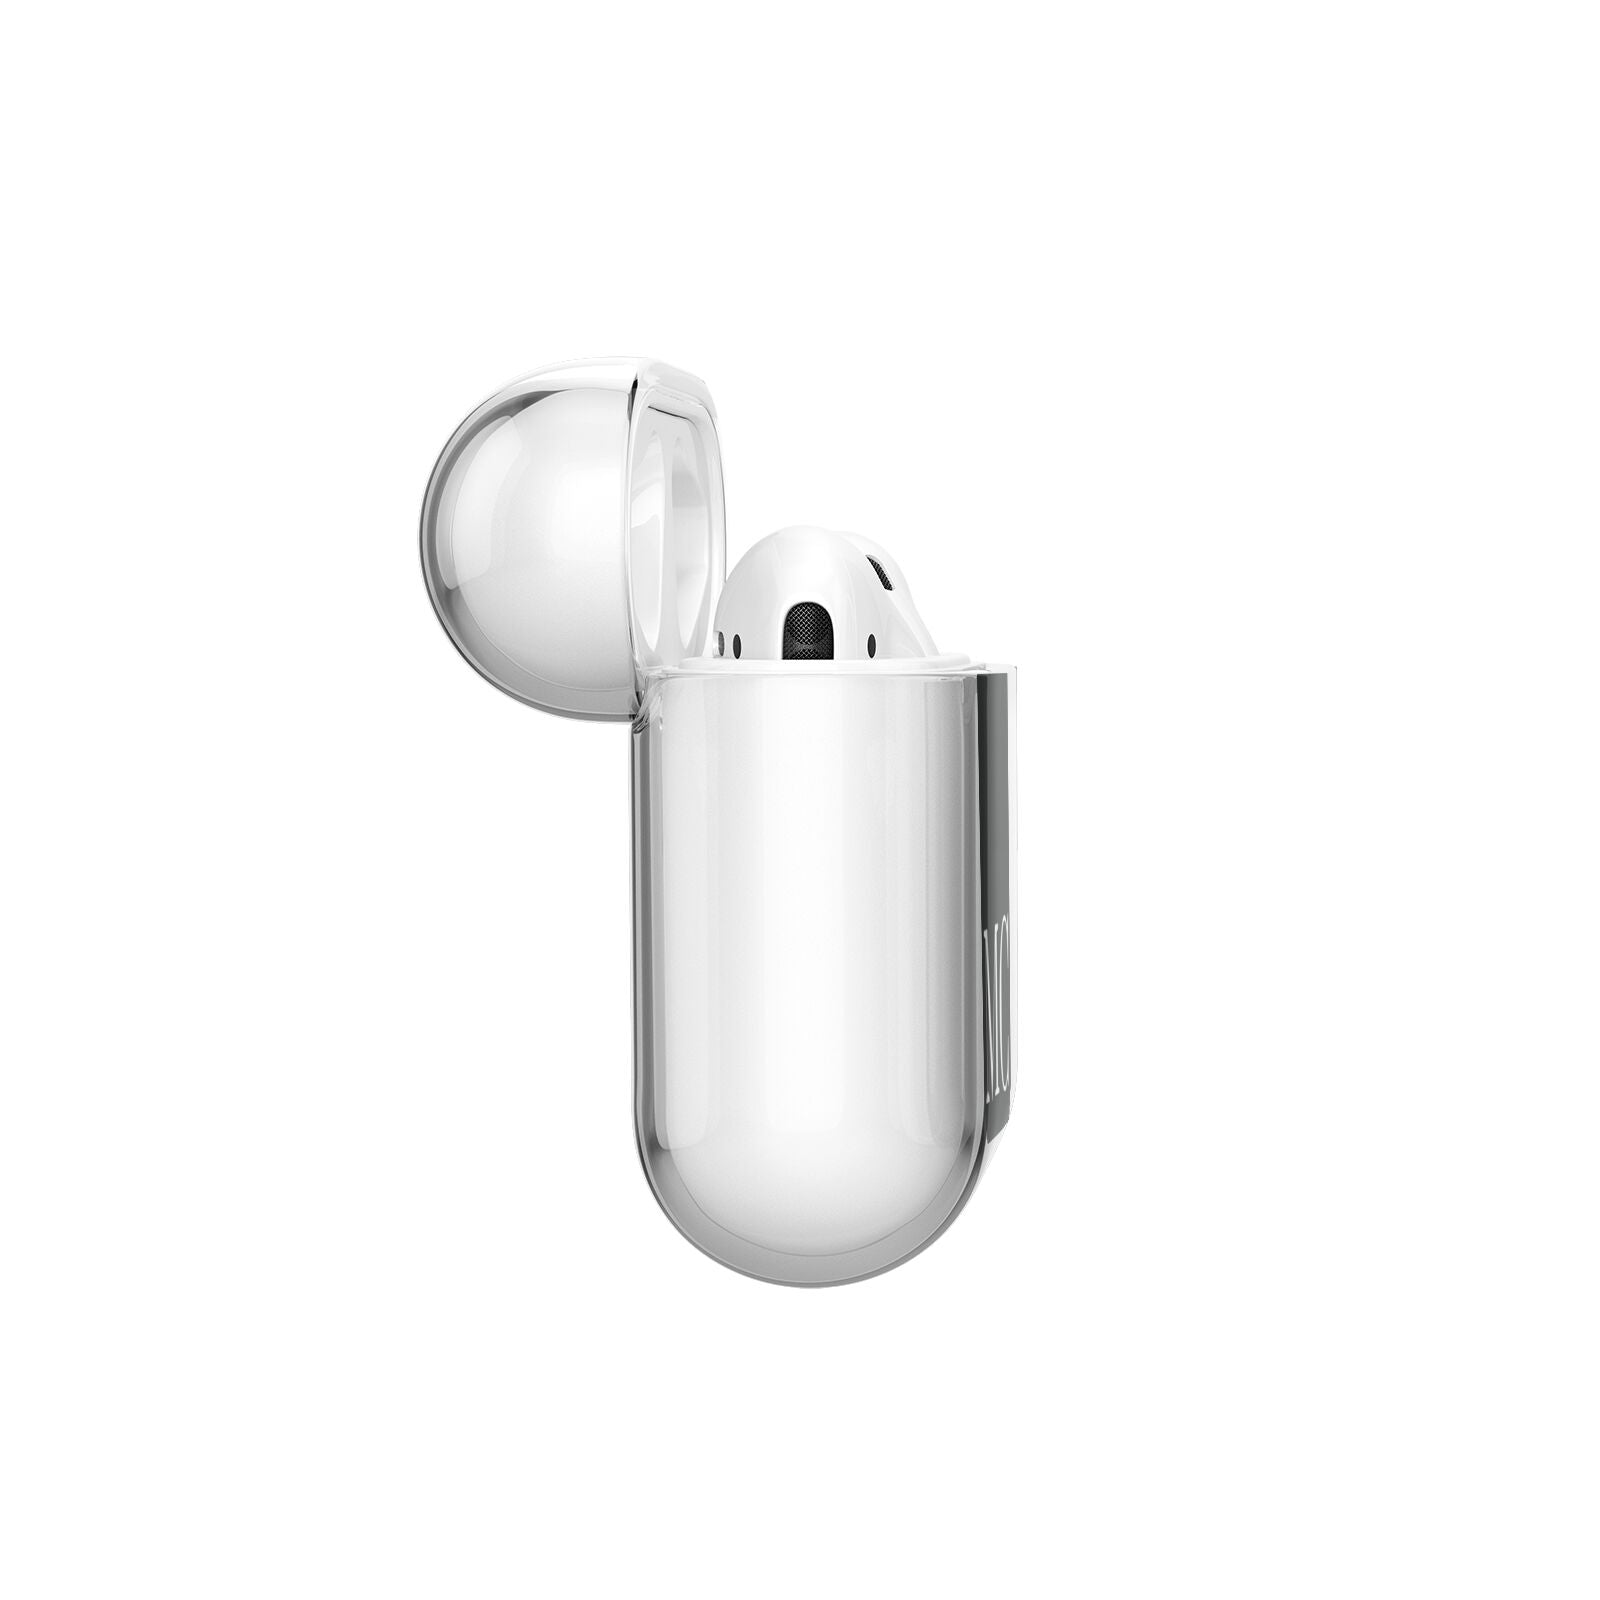 Initials Personalised 1 AirPods Case Side Angle